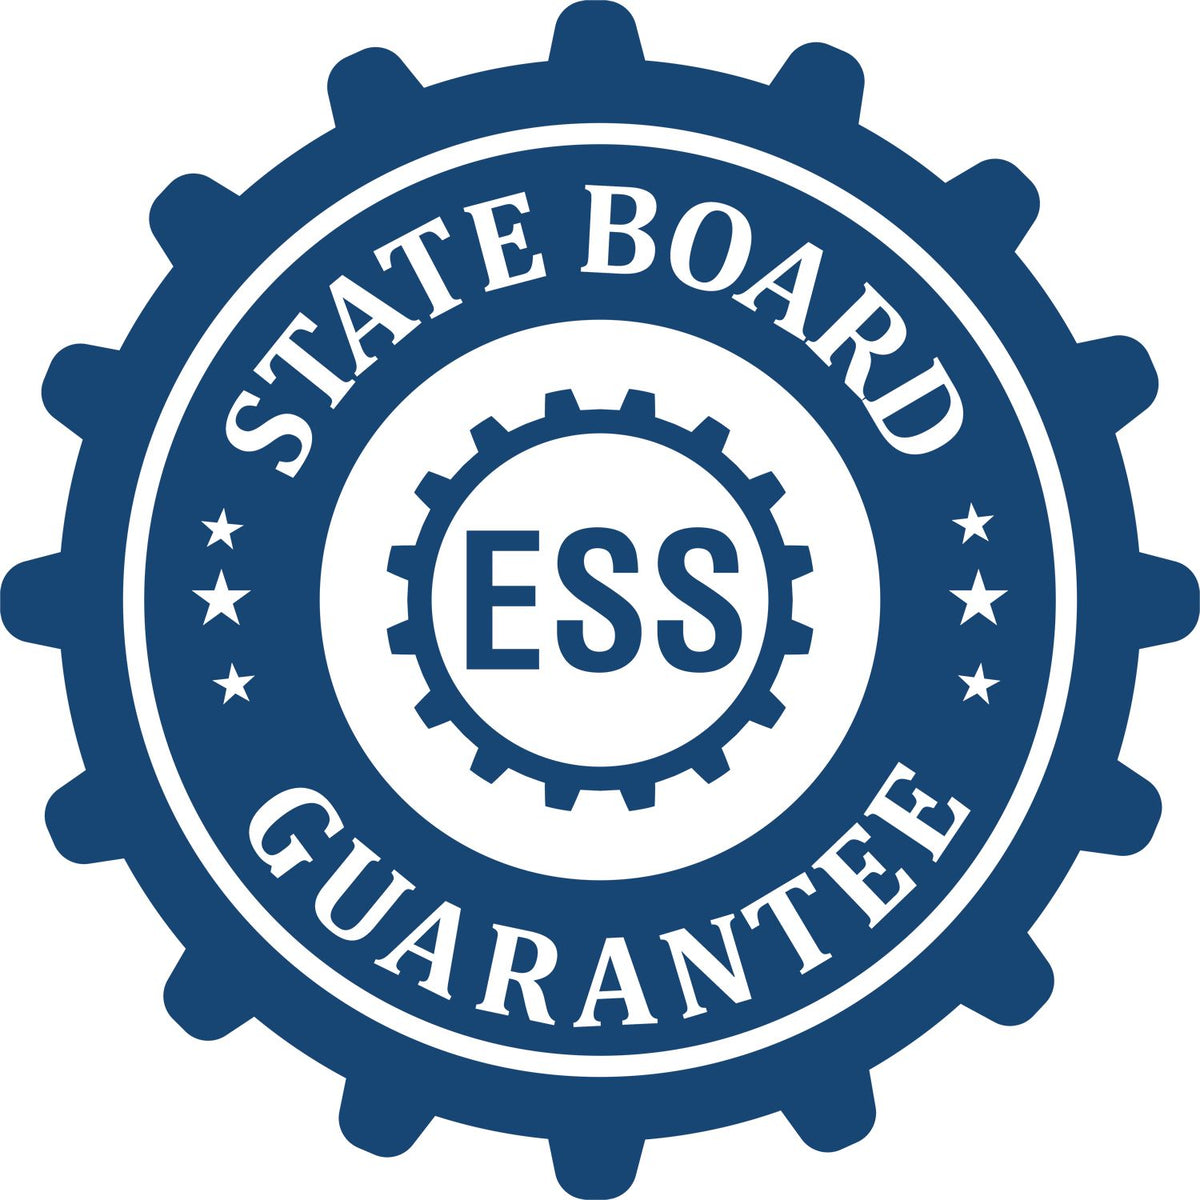 An emblem in a gear shape illustrating a state board guarantee for the Indiana Landscape Architectural Seal Stamp product.